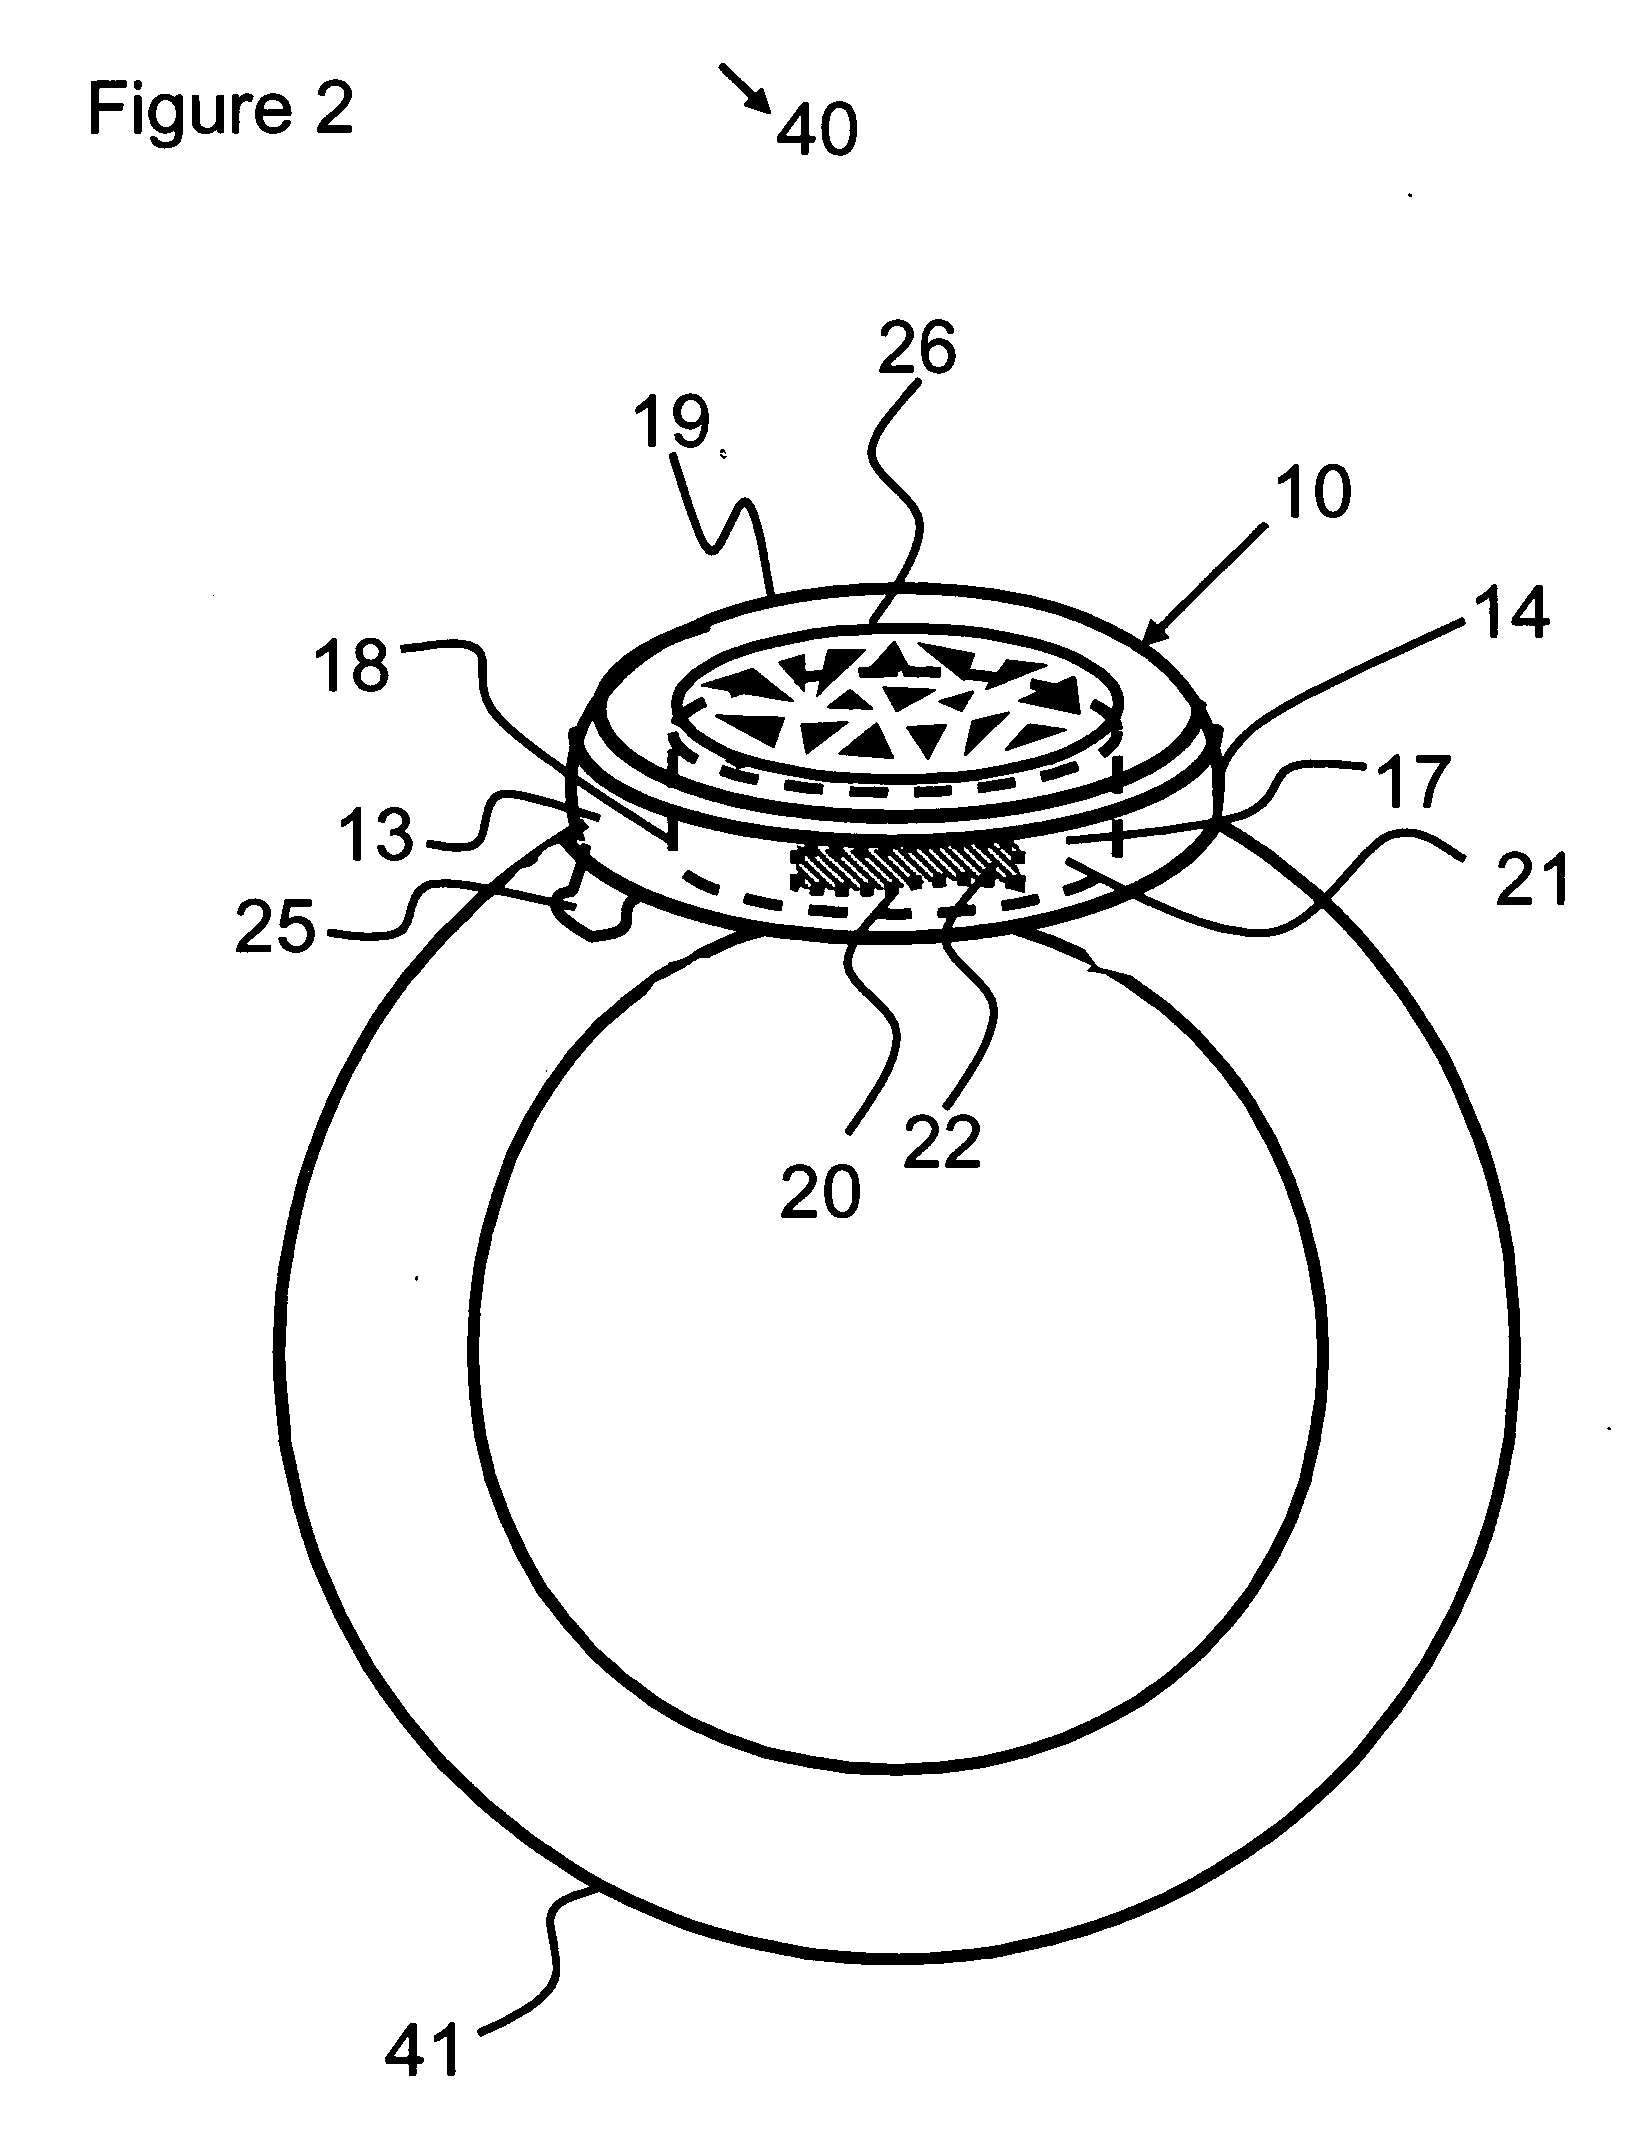 Keepsake storage jewelry apparatus and method for manufacturing the same